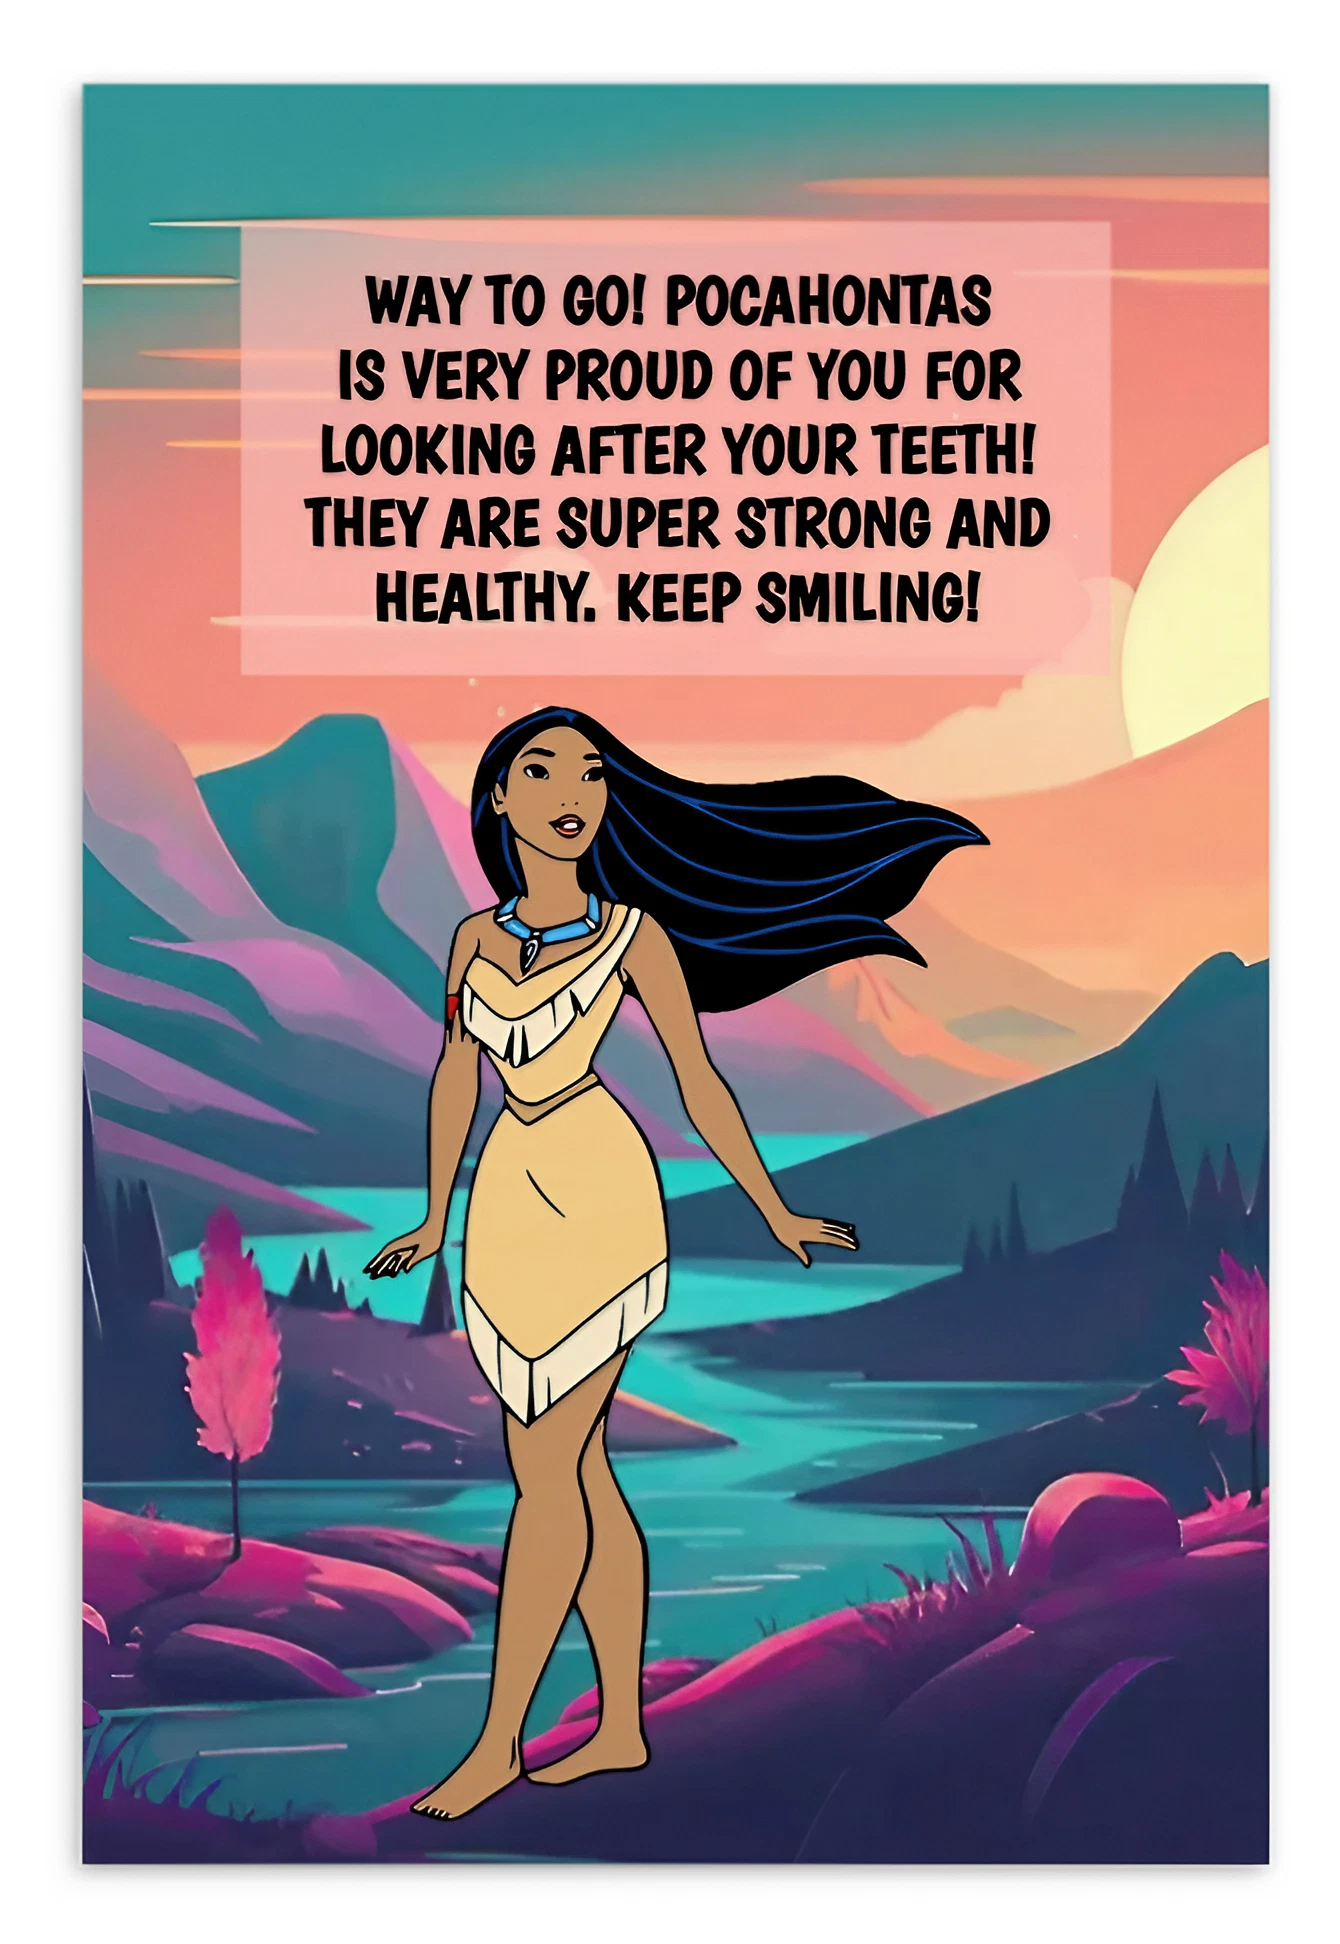 Pocahontas | Dental Motivational & Reward Cards- Way To Go! Pocahontas Is Super Proud Of You For ooking After Your Teeth!